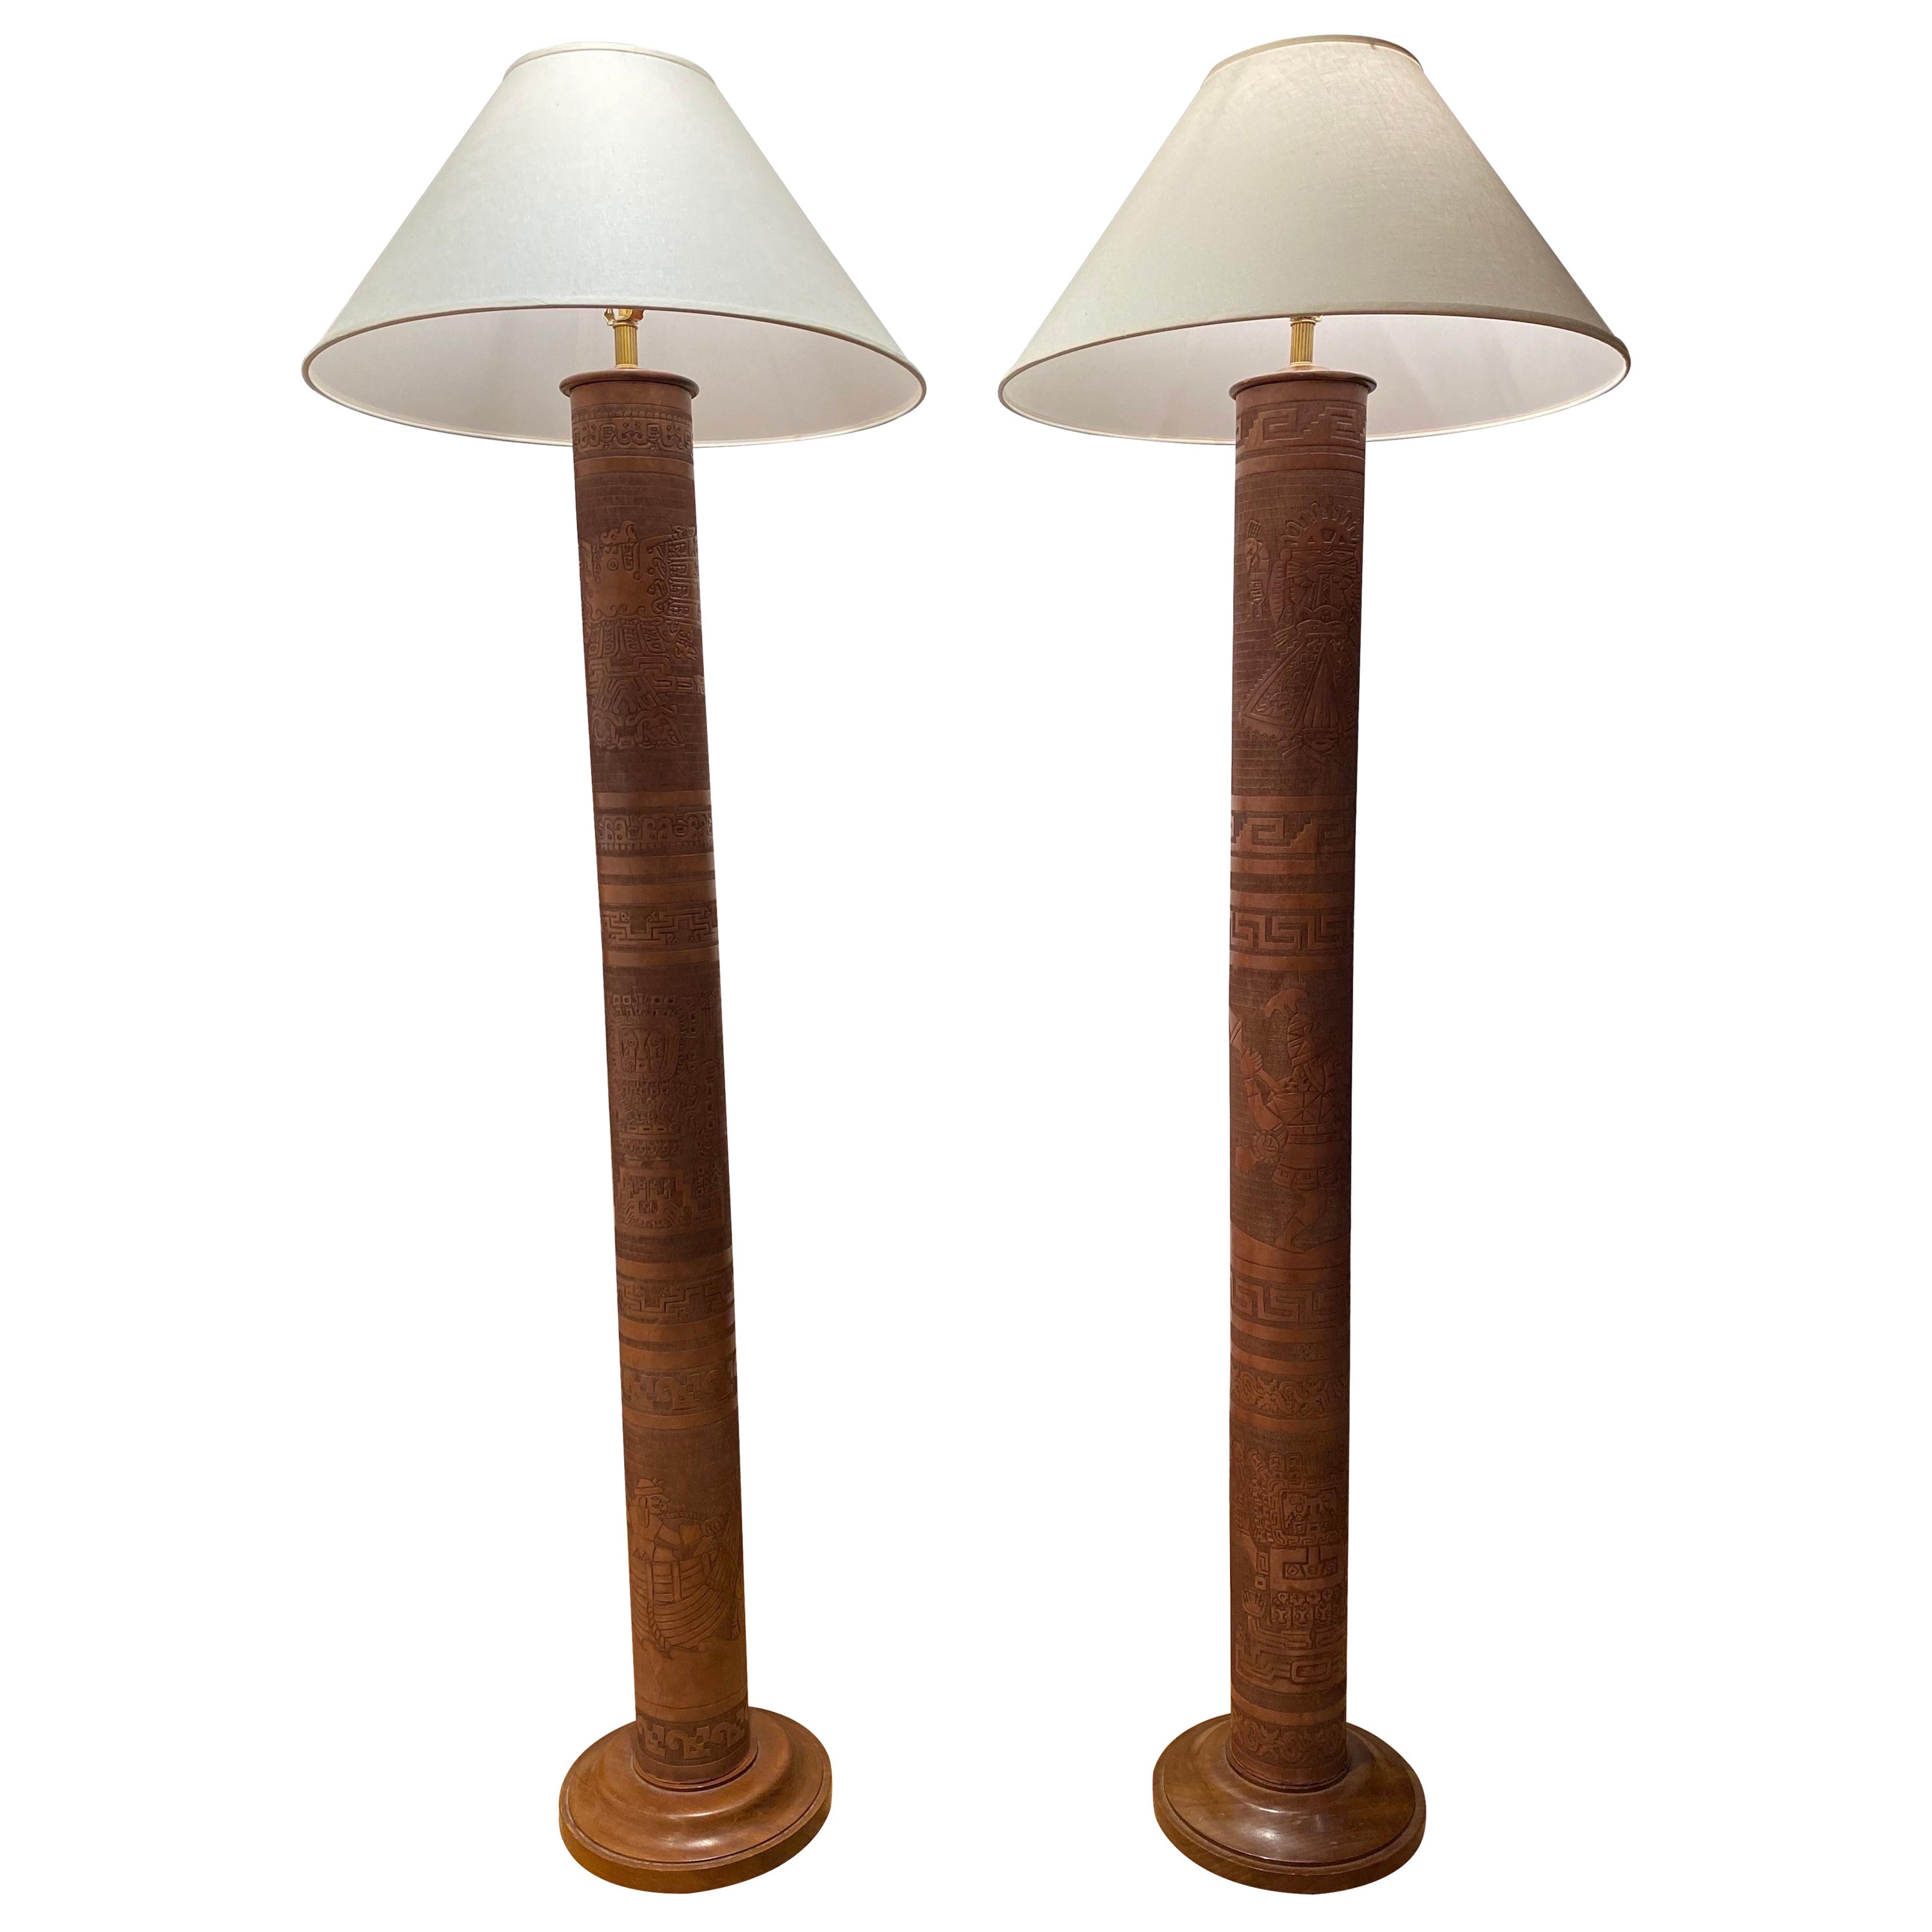 Angel Pazmino Stamped Leather Floor Lamps